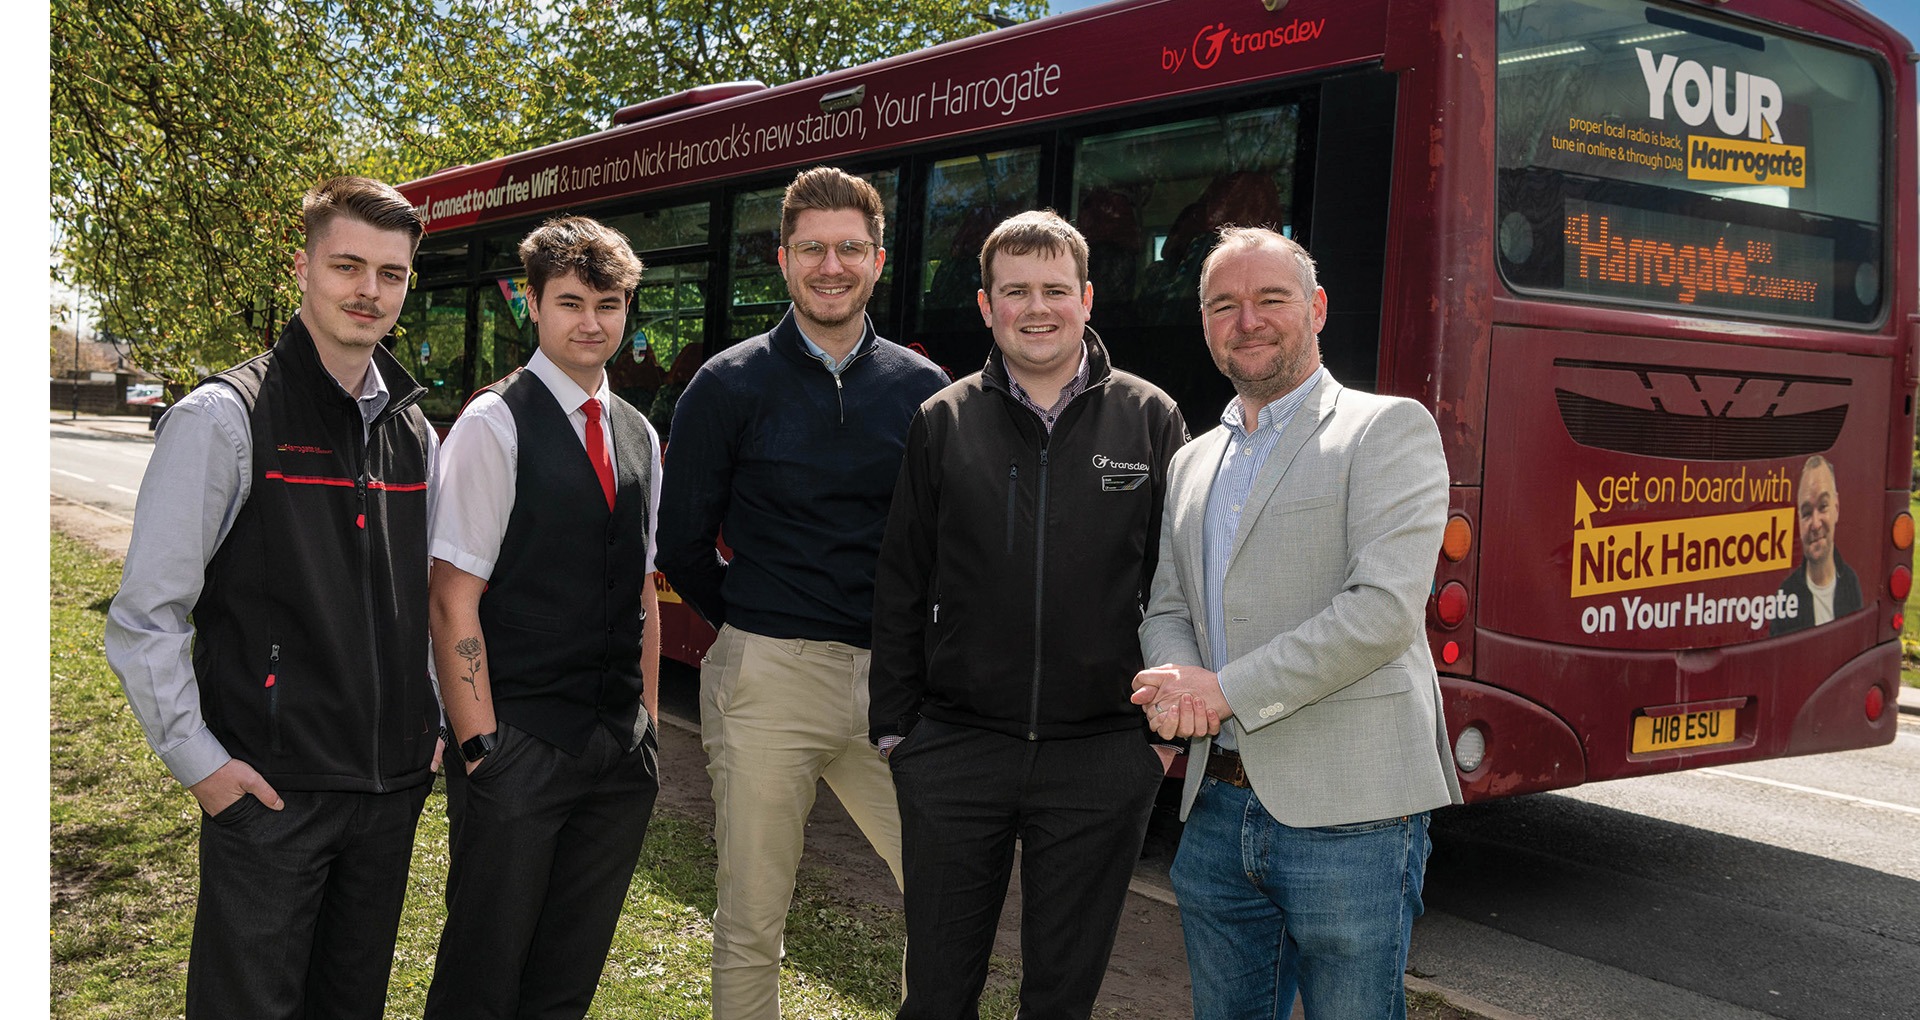 The Harrogate Bus Company unveils specially liveried bus to promote tuning in to Your Harrogate on the move